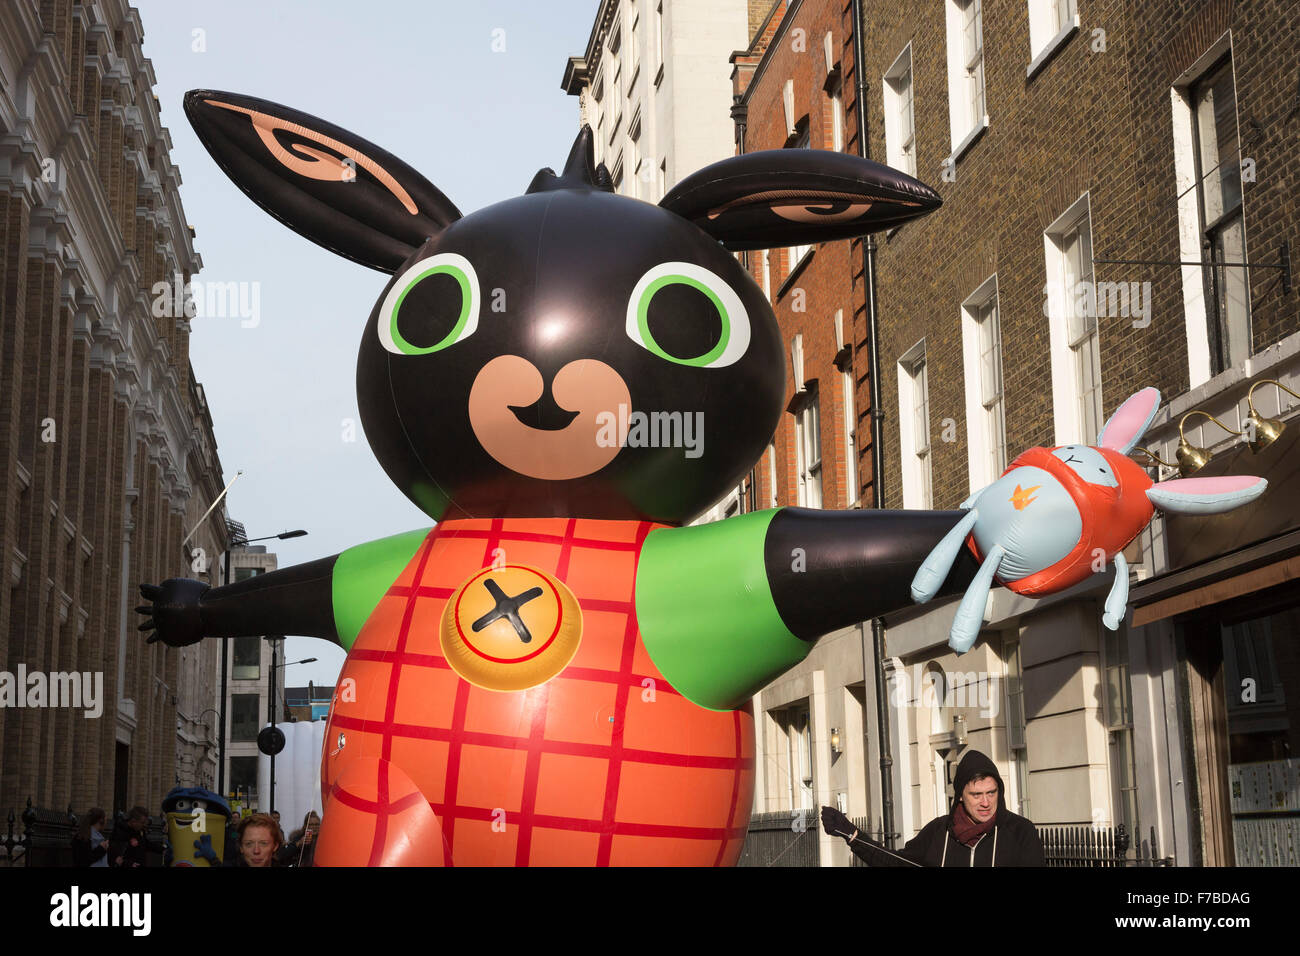 London, UK. 28 November 2015. Handlers manoeuvre a giant inflatable Bing  with his Hoppity Voosh toy through the narrow streets of Soho. The  inaugural Hamleys Christmas Toy Parade takes place along Regent